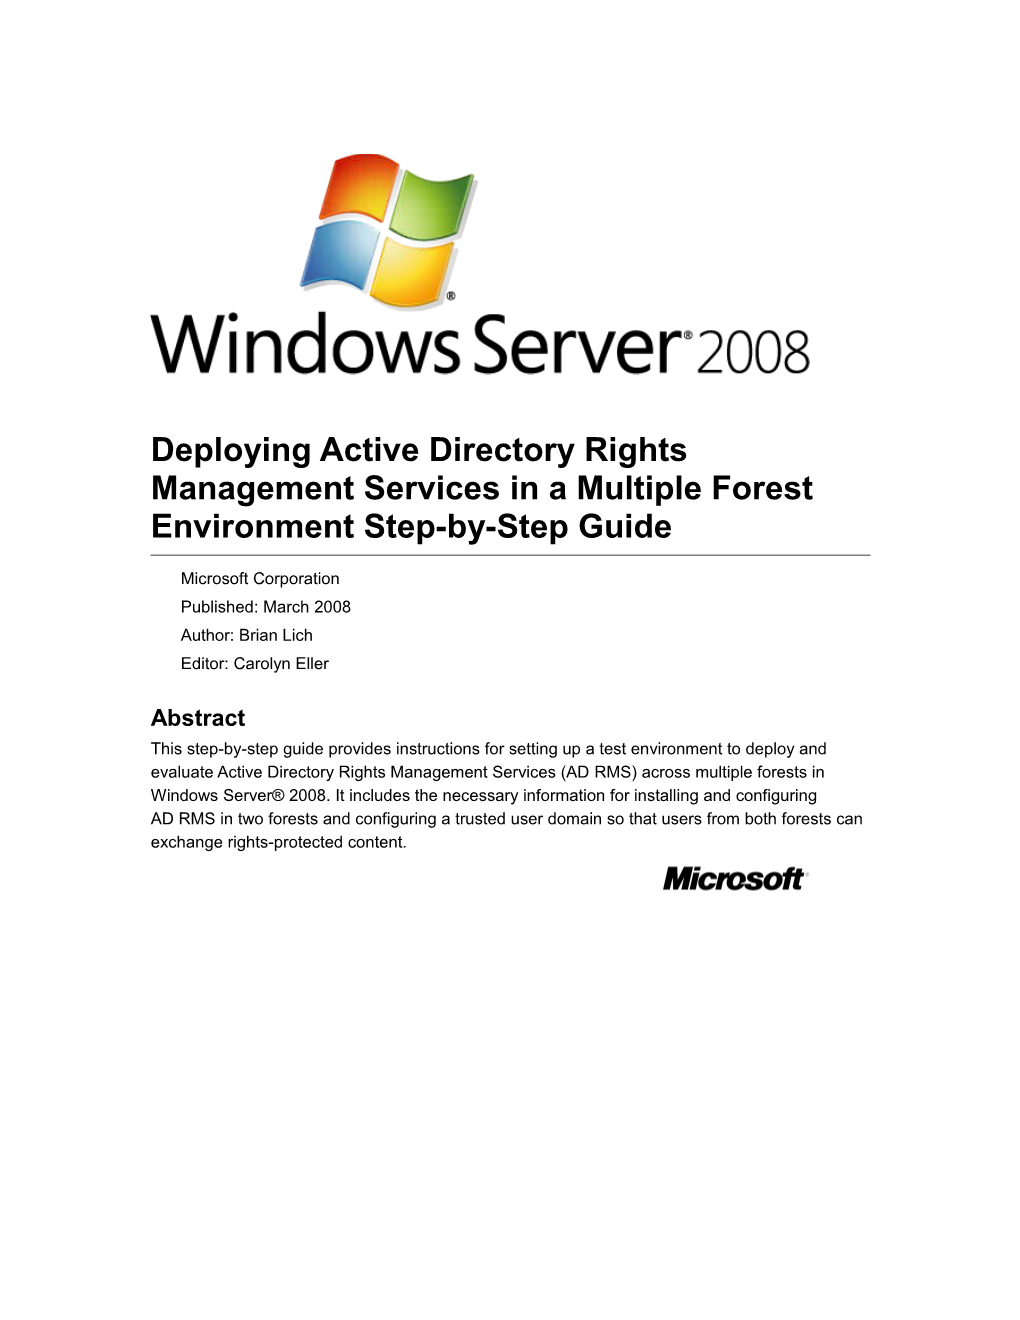 Deploying Active Directory Rights Management Services in a Multiple Forest Environment